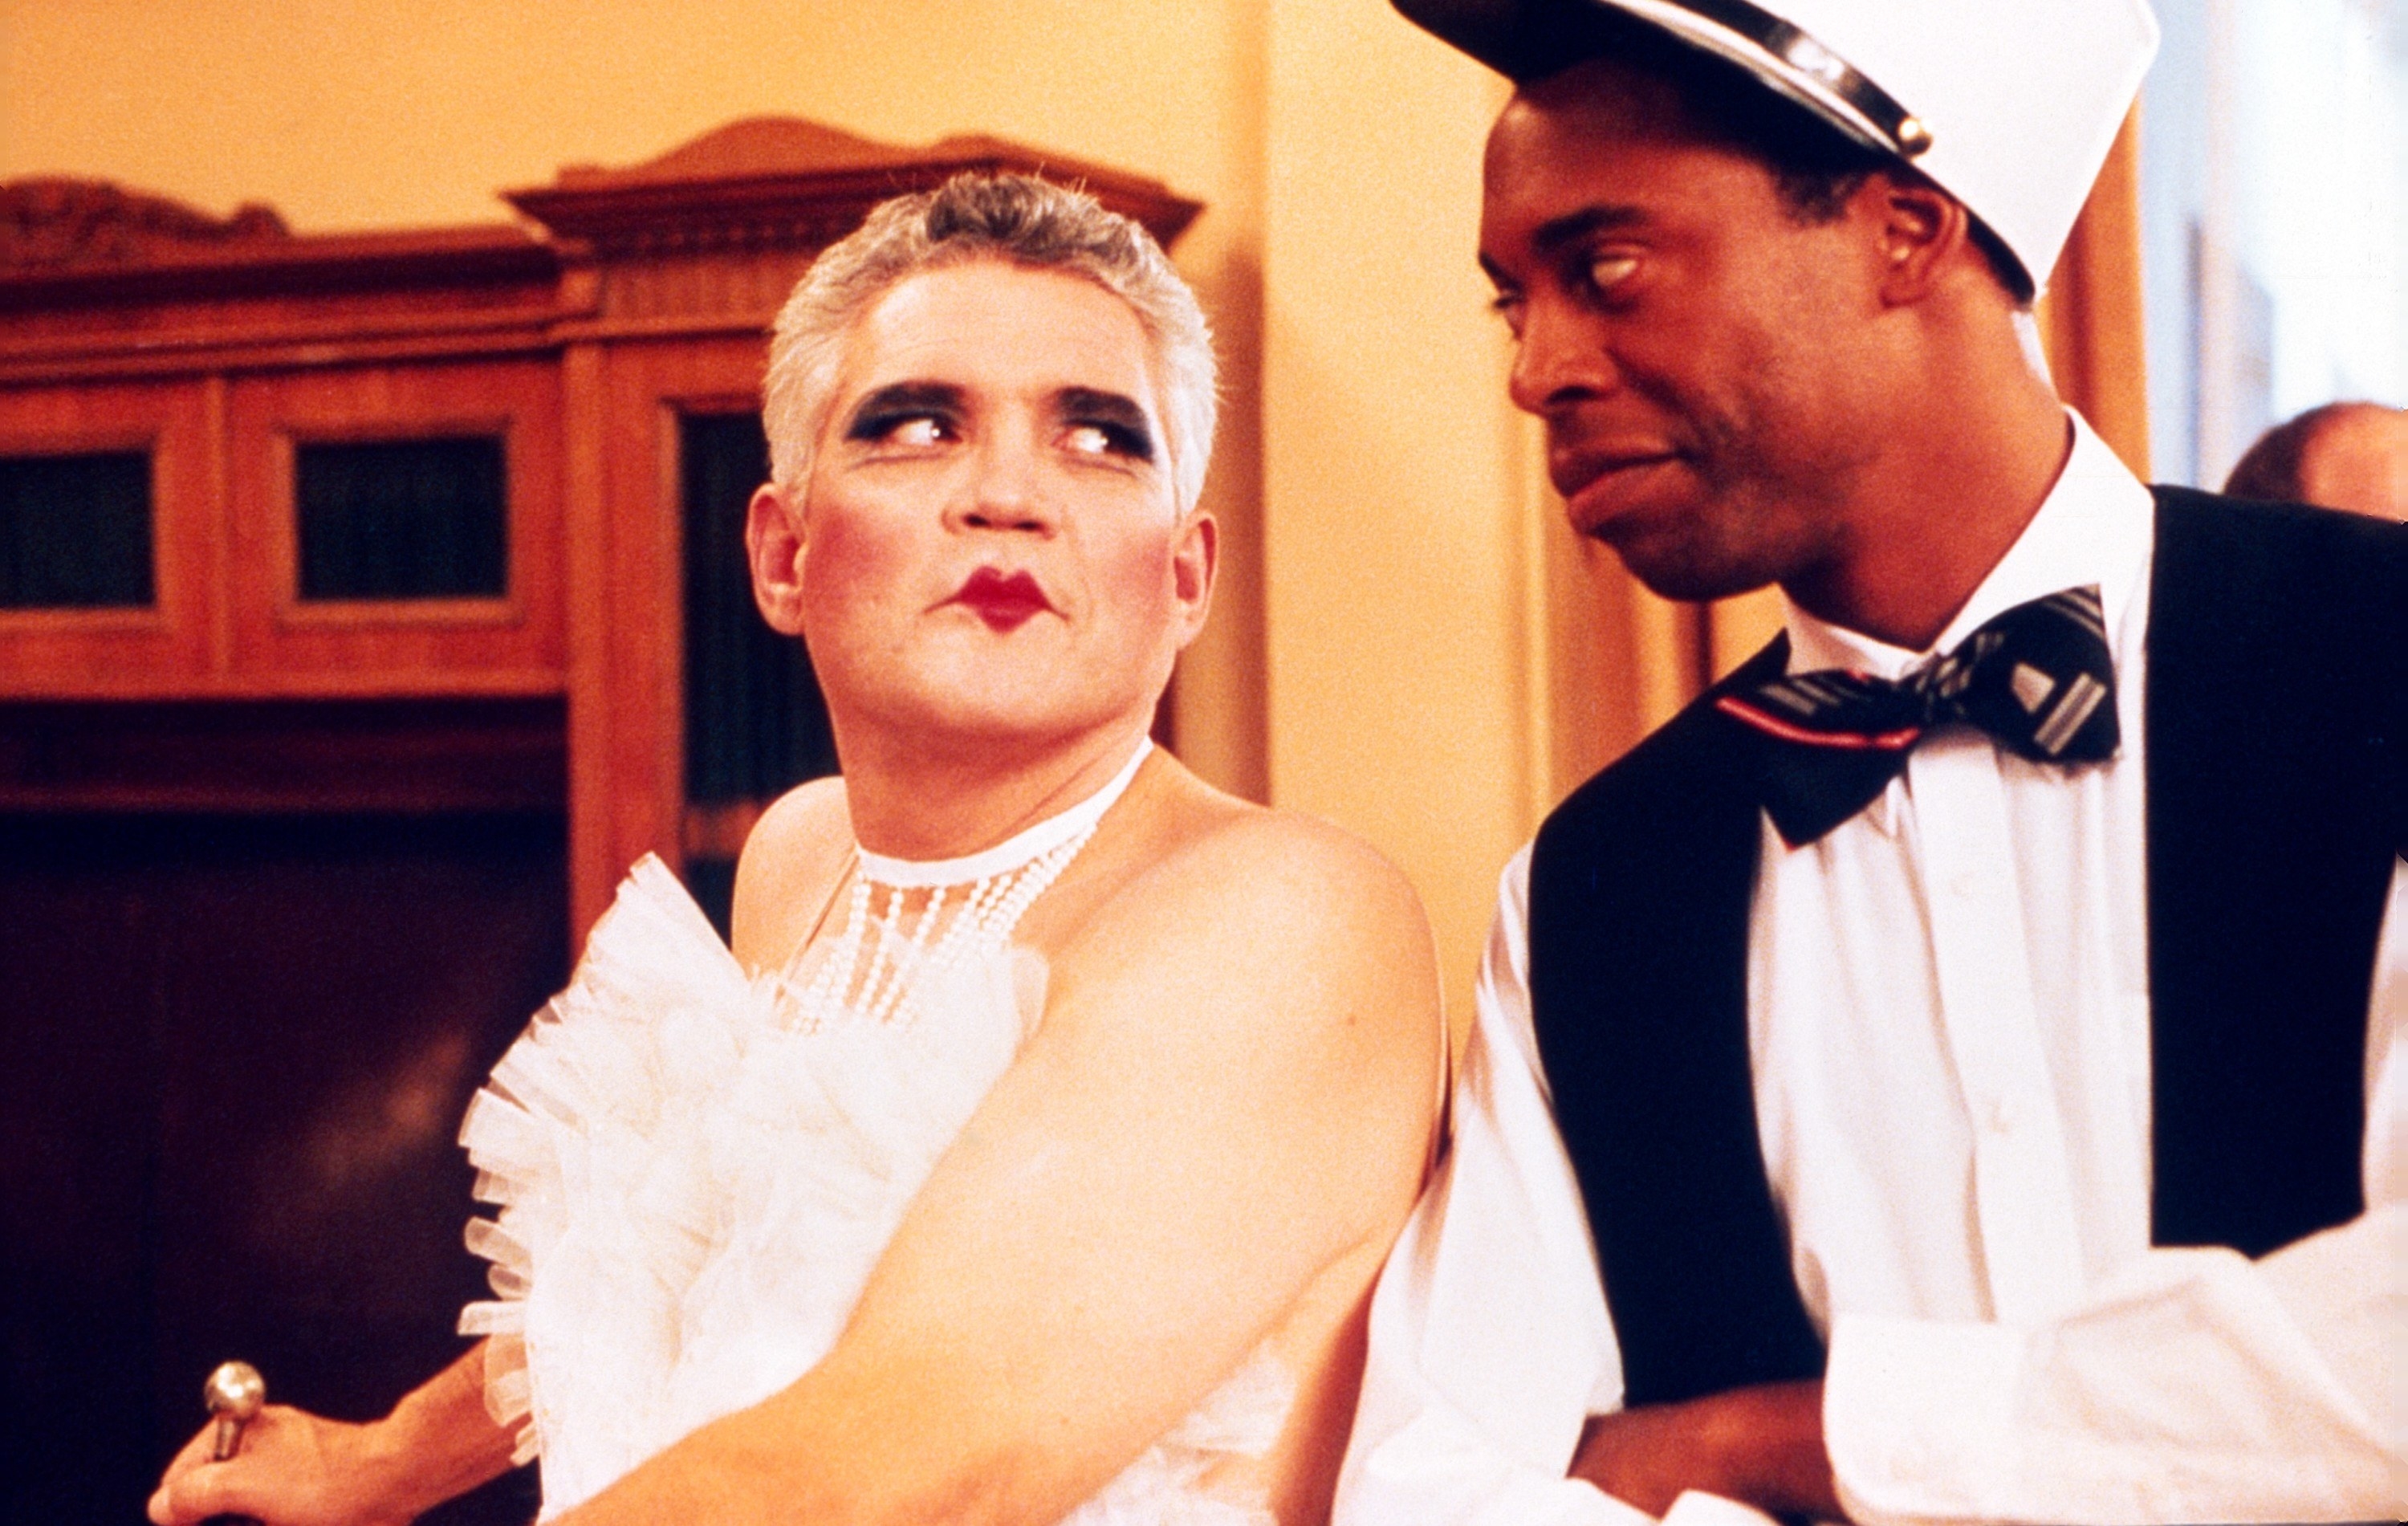 man in drag with another man in the film